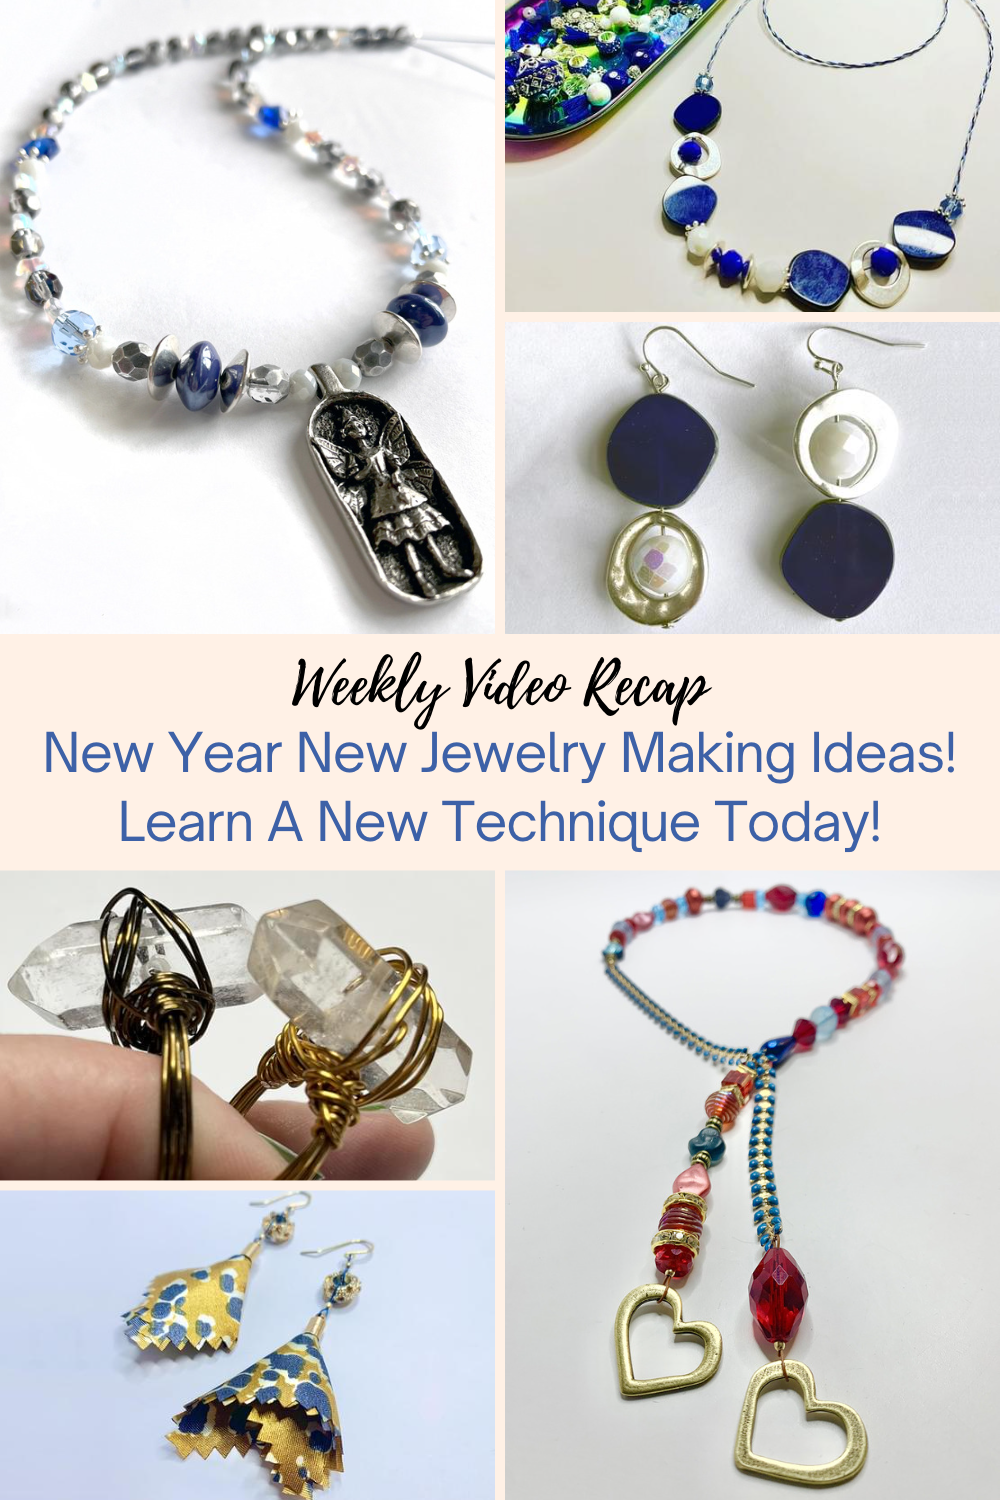 New Year New Jewelry Making Ideas! Learn A New Technique Today! Collage